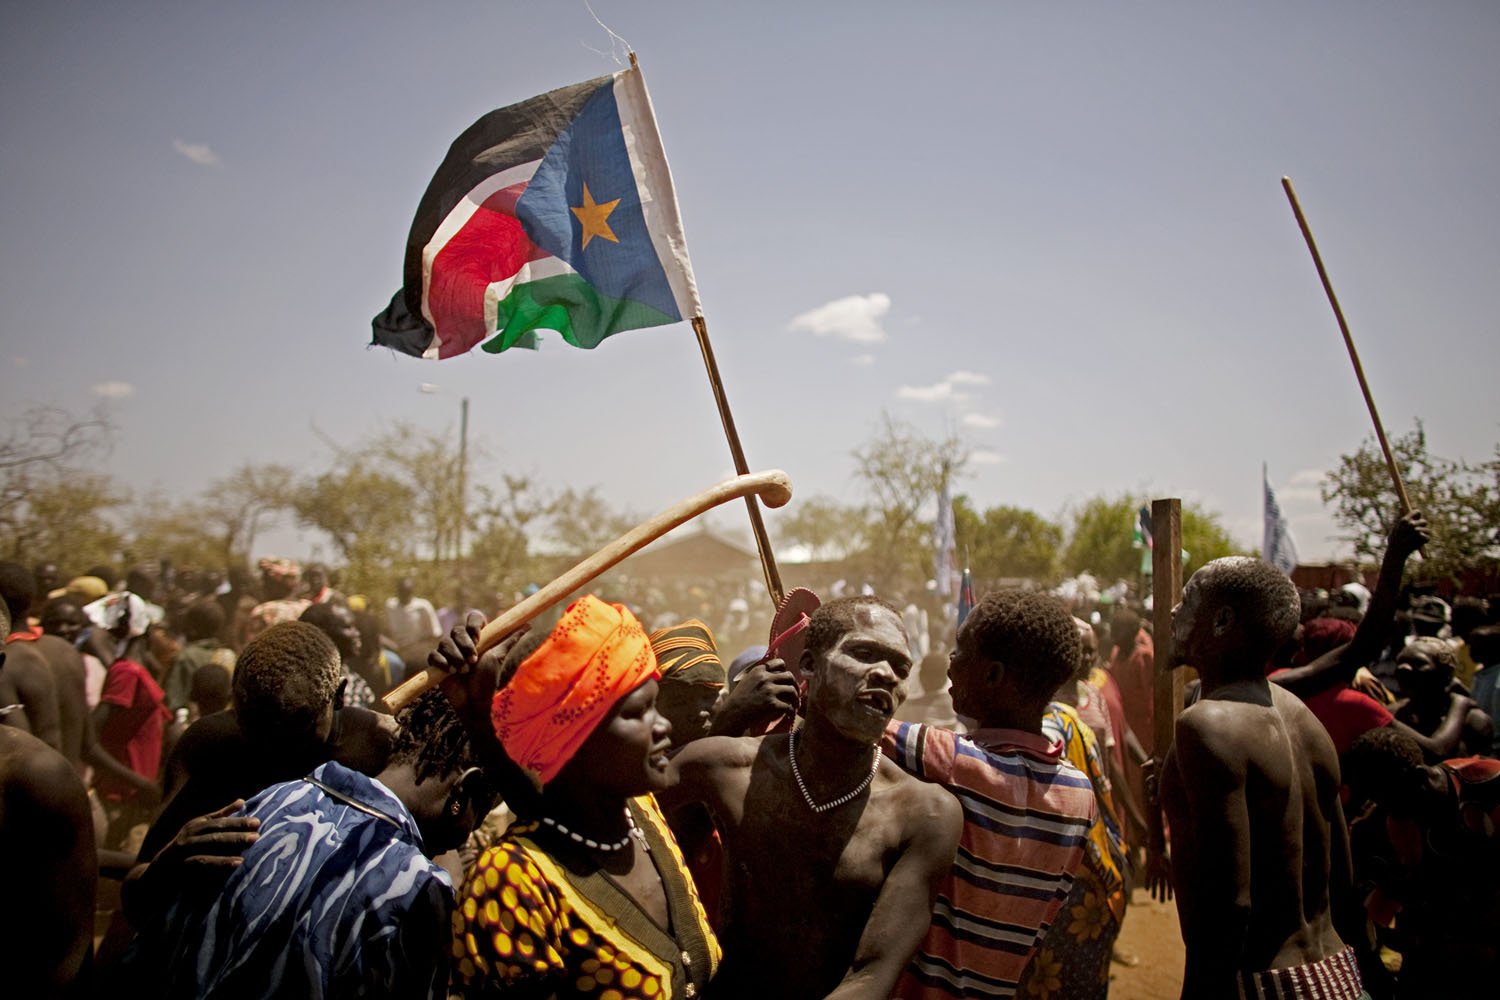  Southern Sudanese from the pastoralist Taposa tribe take part in a nationalist celebration in the remote area of Kapoeta. Support for southern independence is strong even among groups in the most desolate areas. Like numerous pastoral tribes in the 